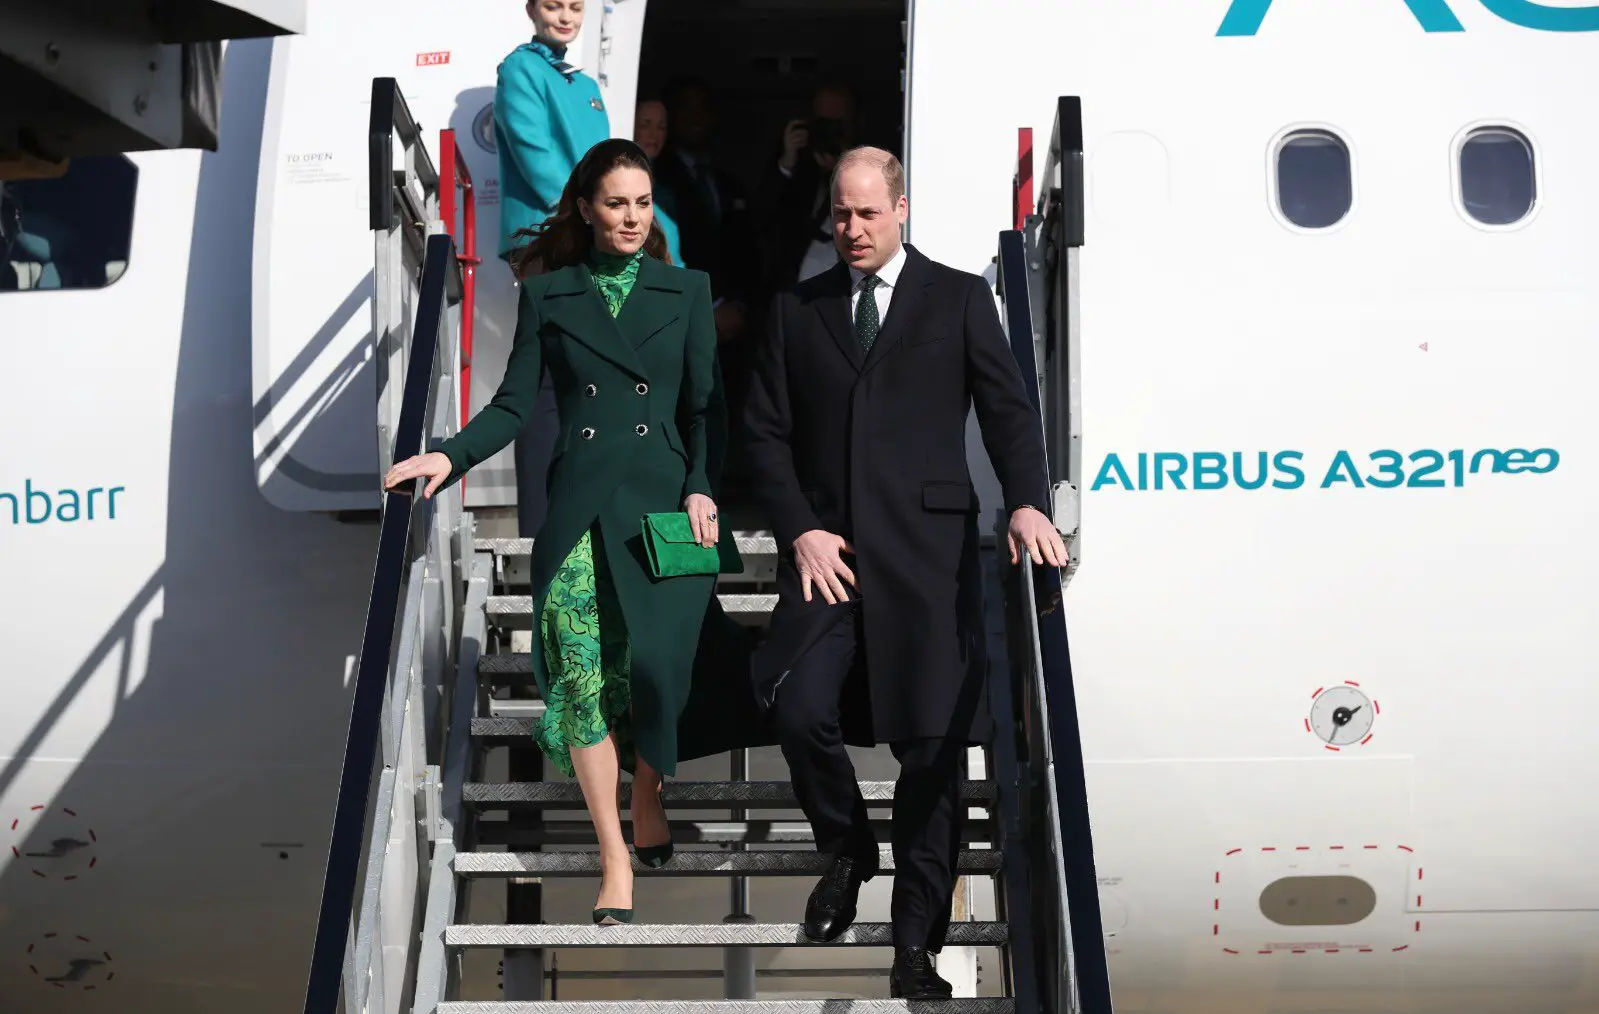 Duke and Duchess of Cambridge arrived in Ireland for Day one